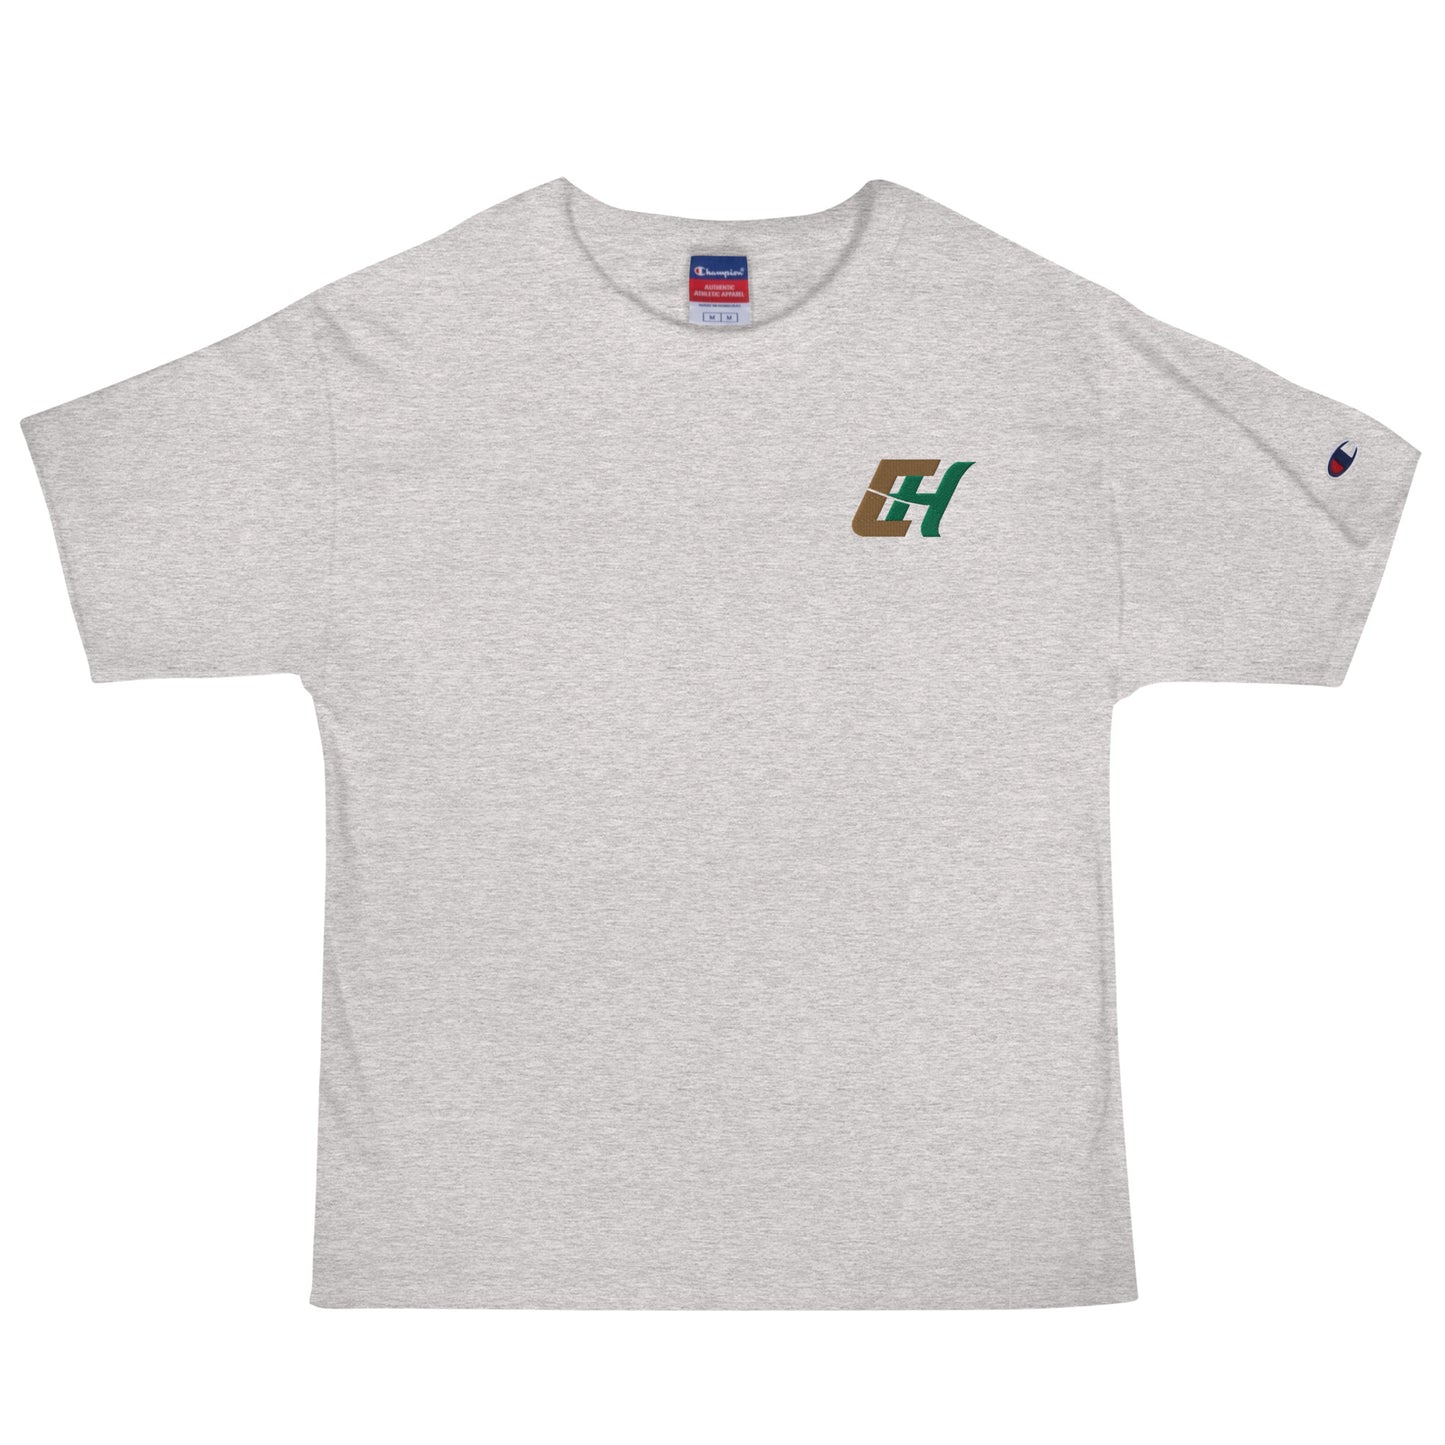 CH Embroidered Men's Champion T-Shirt